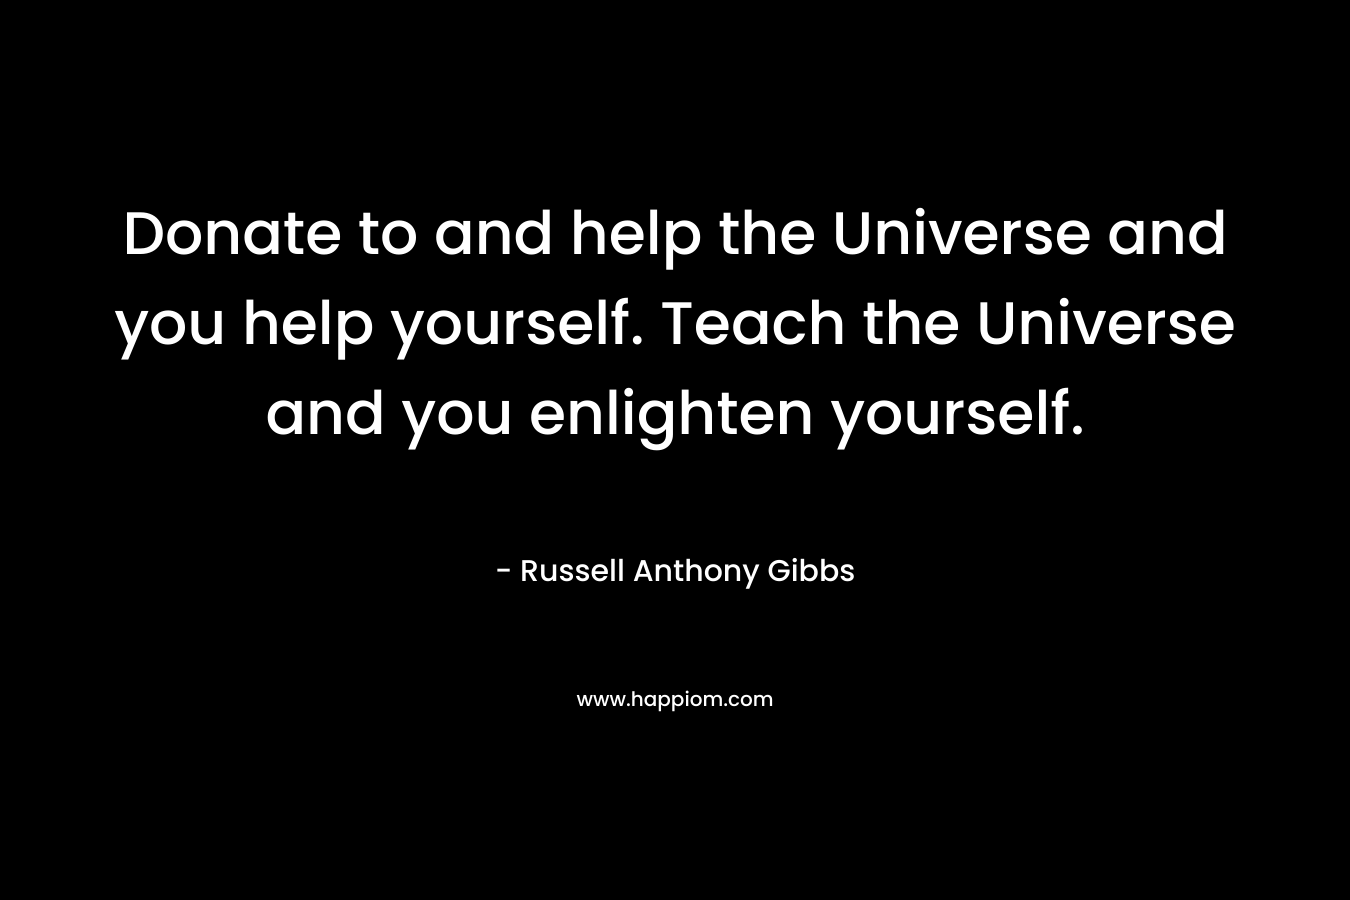 Donate to and help the Universe and you help yourself. Teach the Universe and you enlighten yourself.